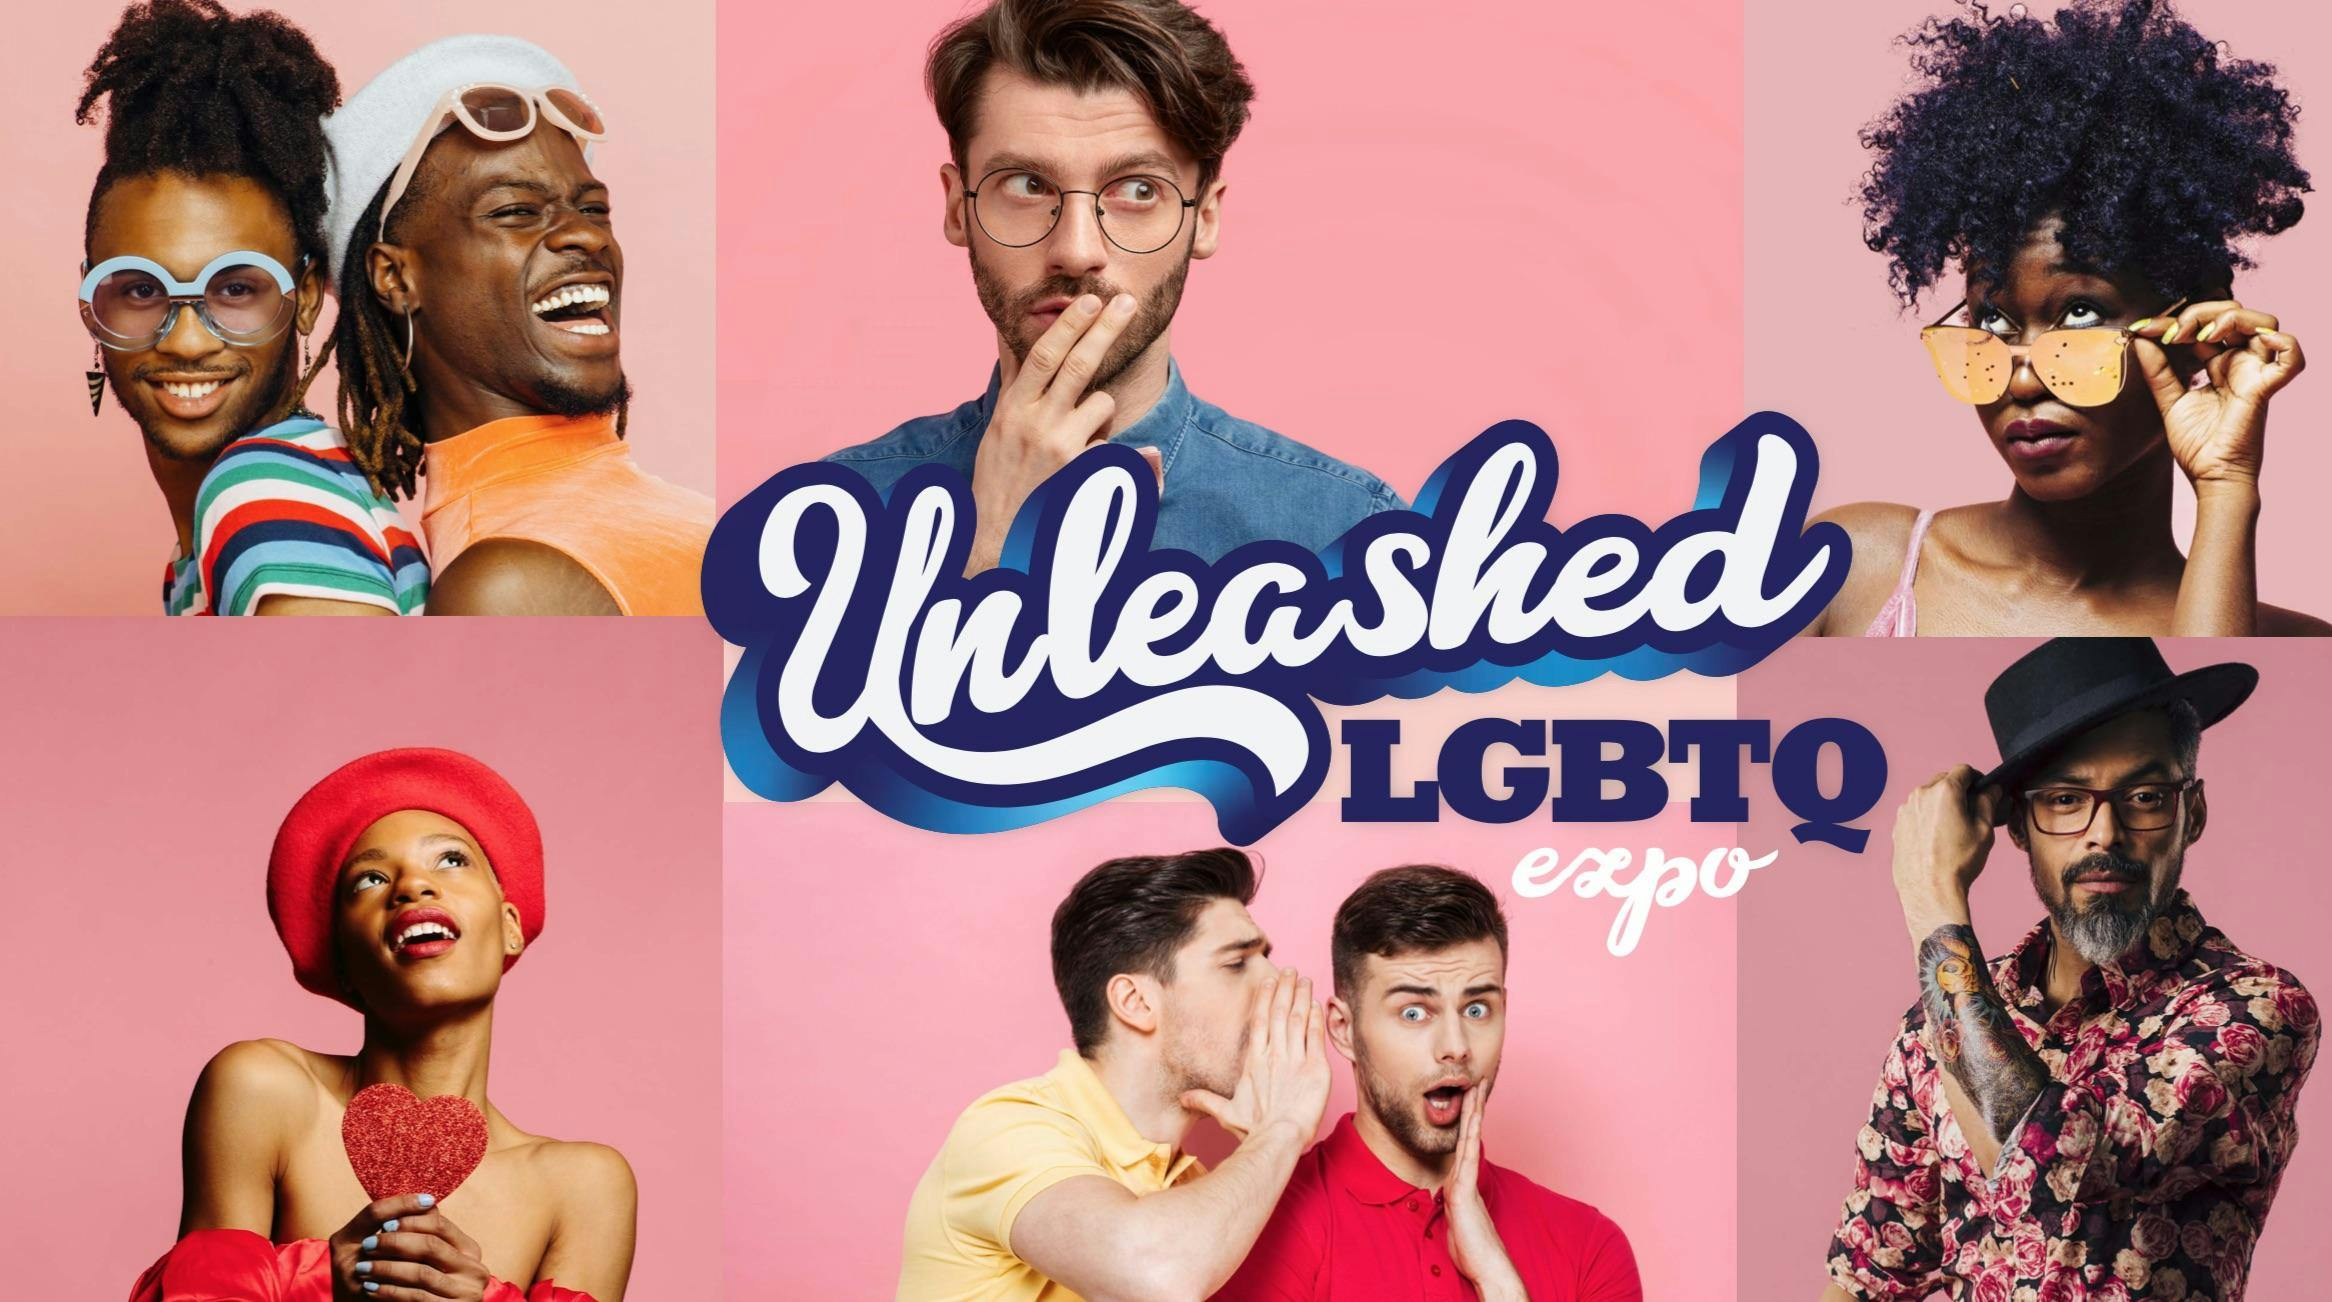 Unleashed LGBTQ Expo 2020